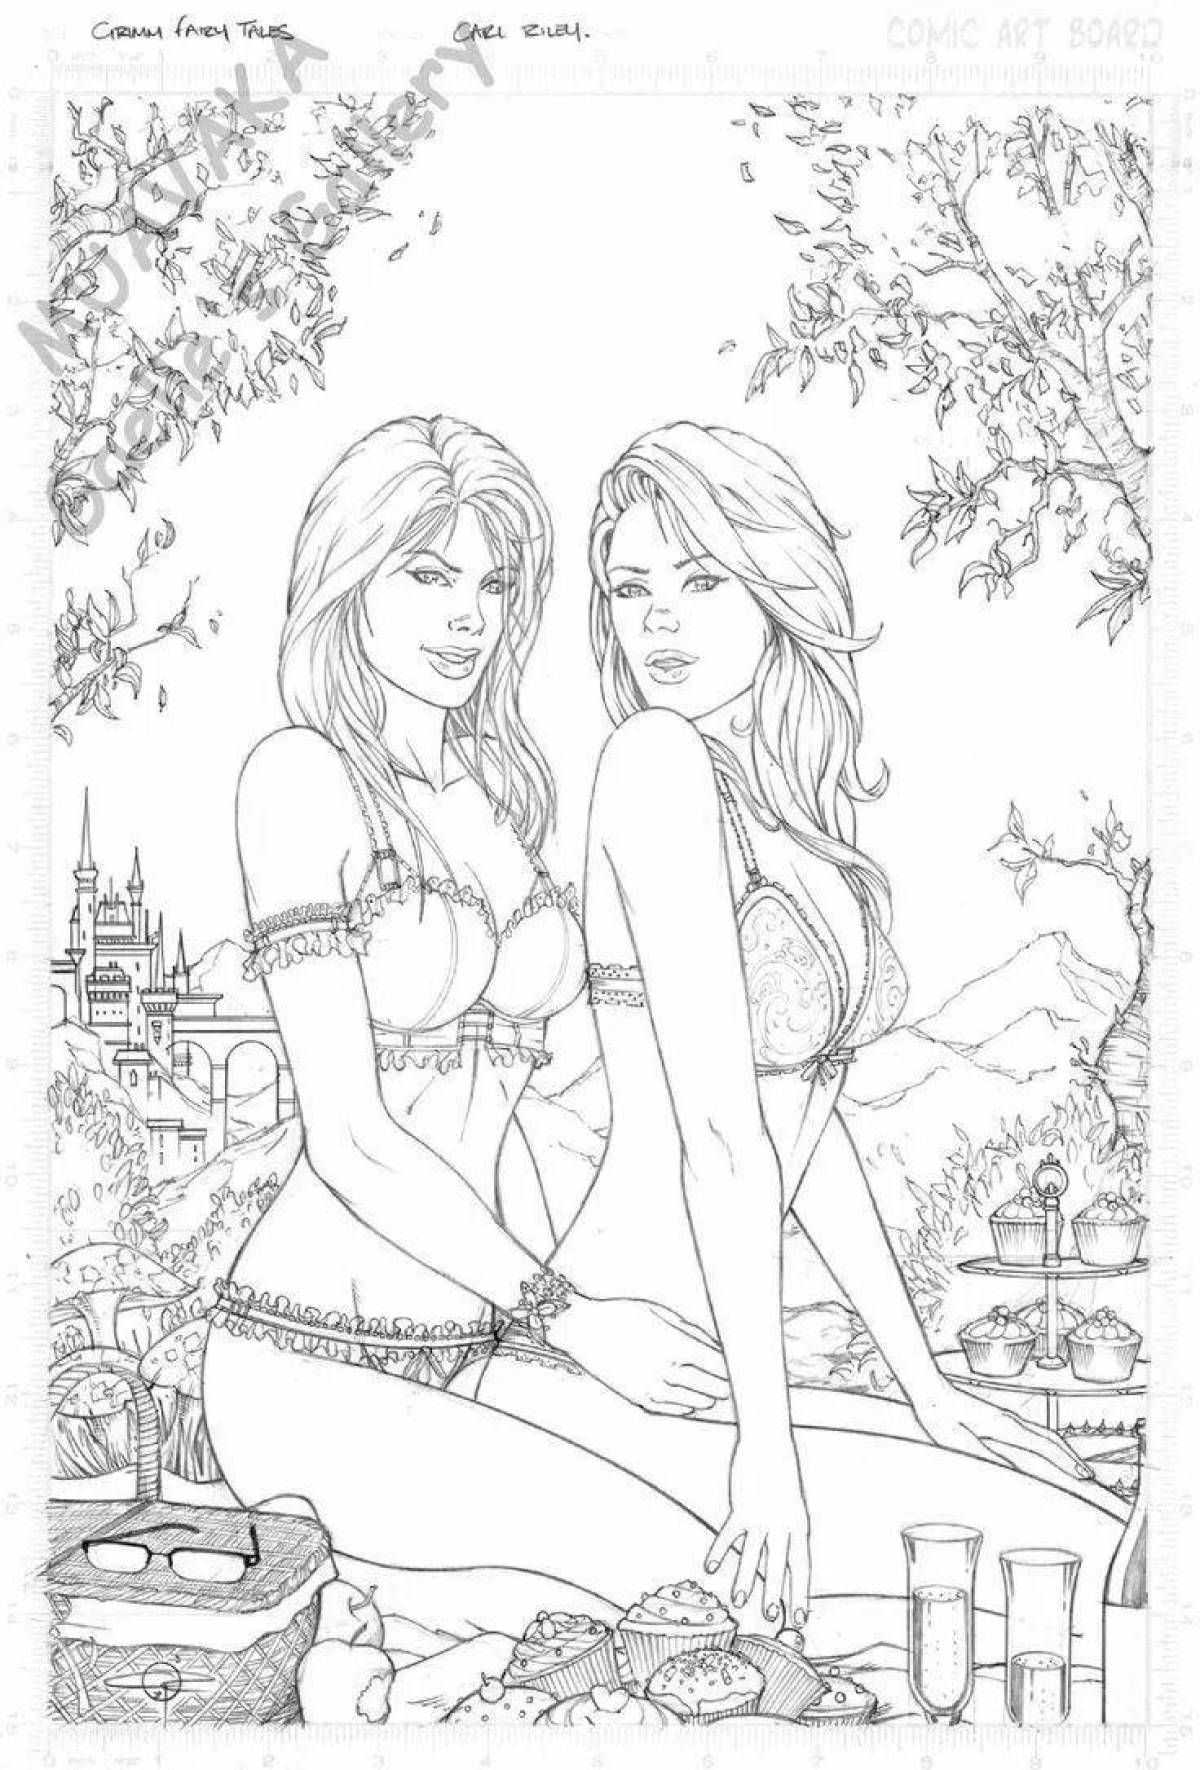 Intriguing coloring page 18 plus vulgarity